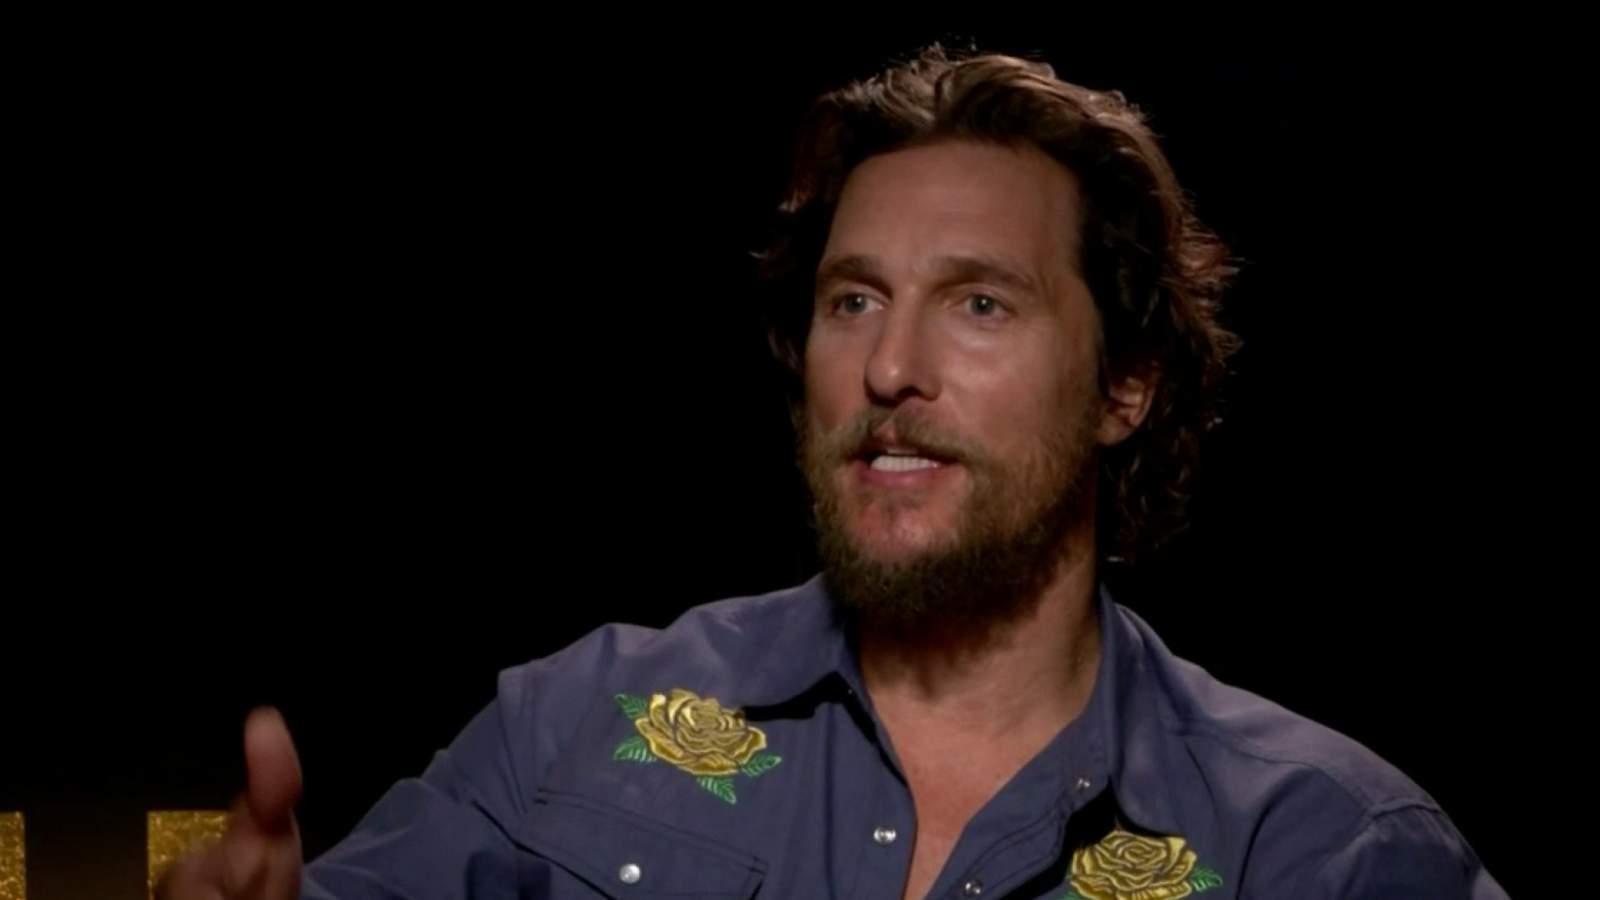 5 takeaways from ‘The Balanced Voice Podcast’ with Matthew McConaughey